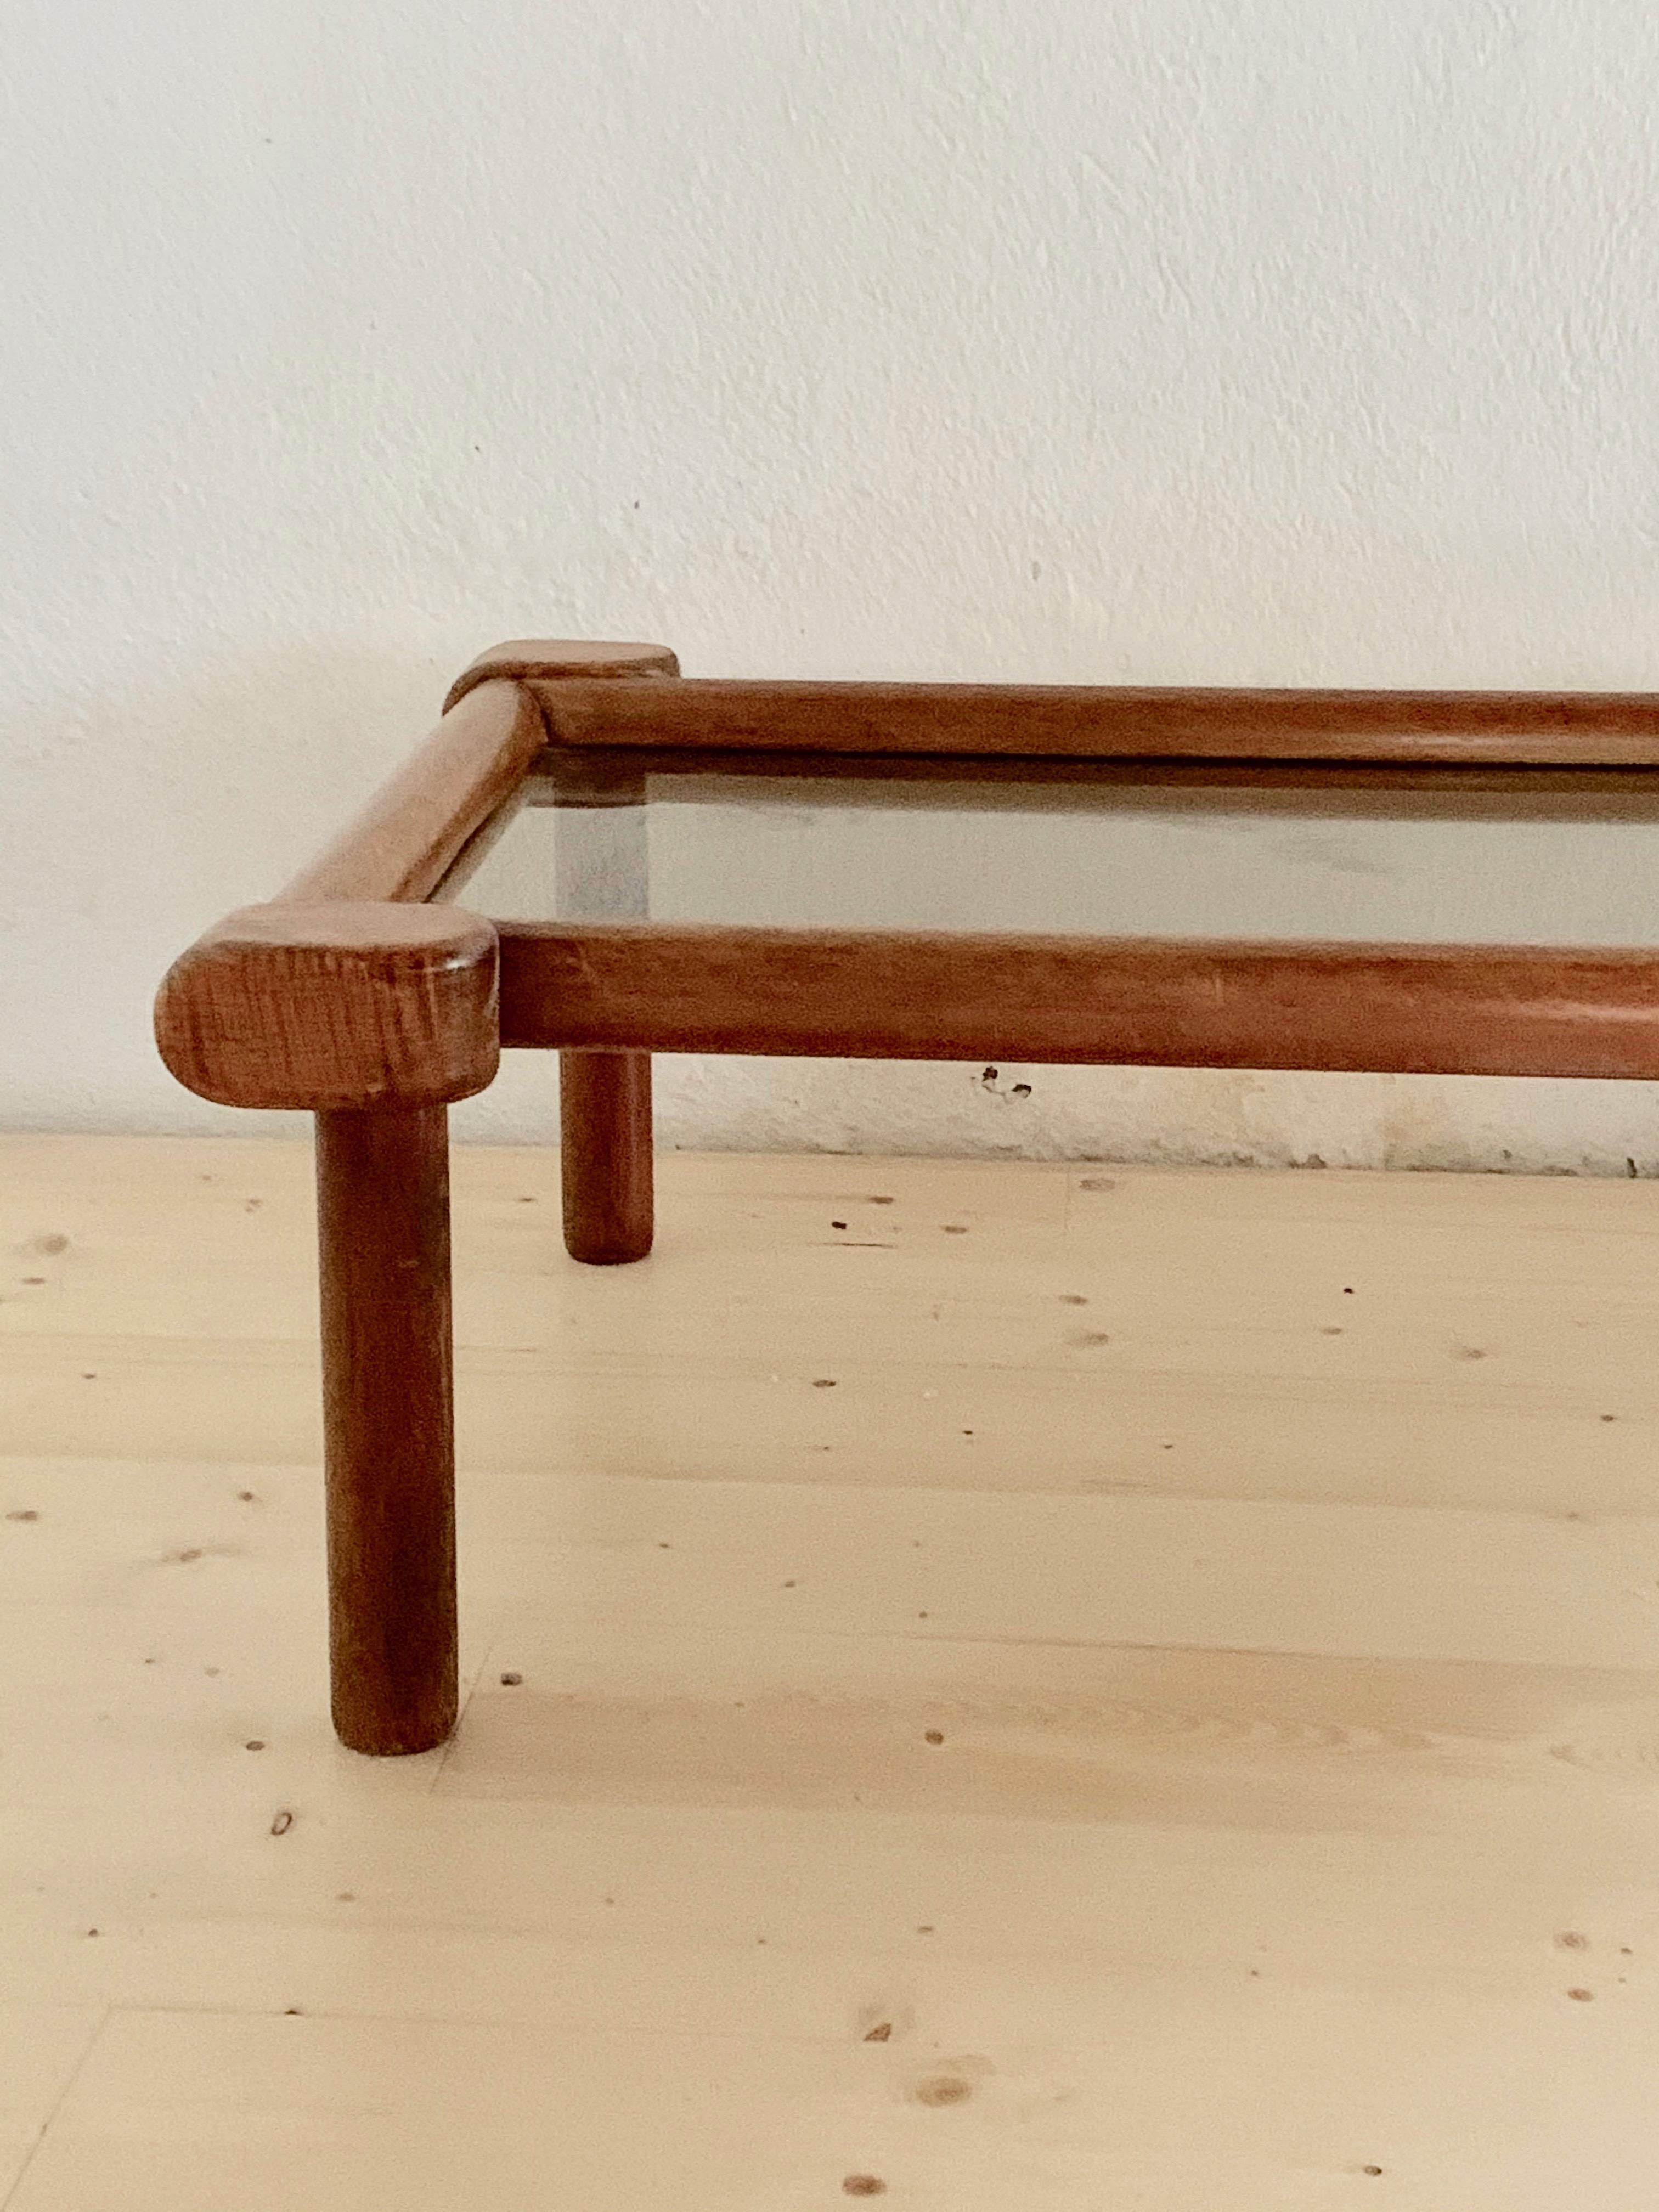 Elm and glass coffee table
Wooden frame with single glass top
Stylised and chic
circa 1960, France
Very good vintage condition.